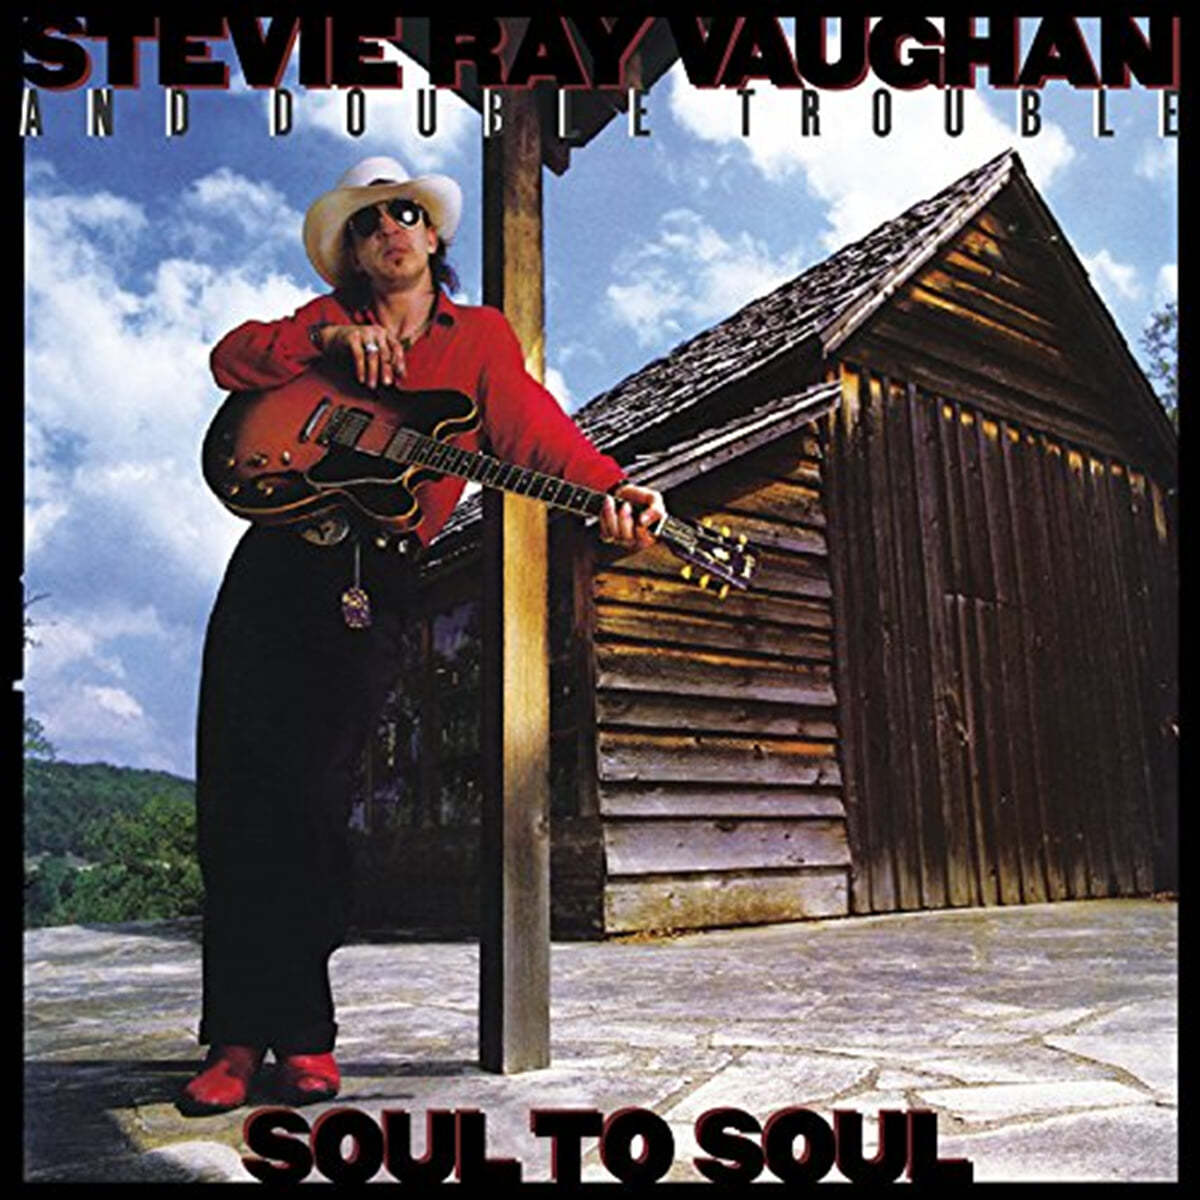 Stevie Ray Vaughan / Double Trouble (스티비 레이 본 / 더블 트러블) - Soul To Soul [2LP] 